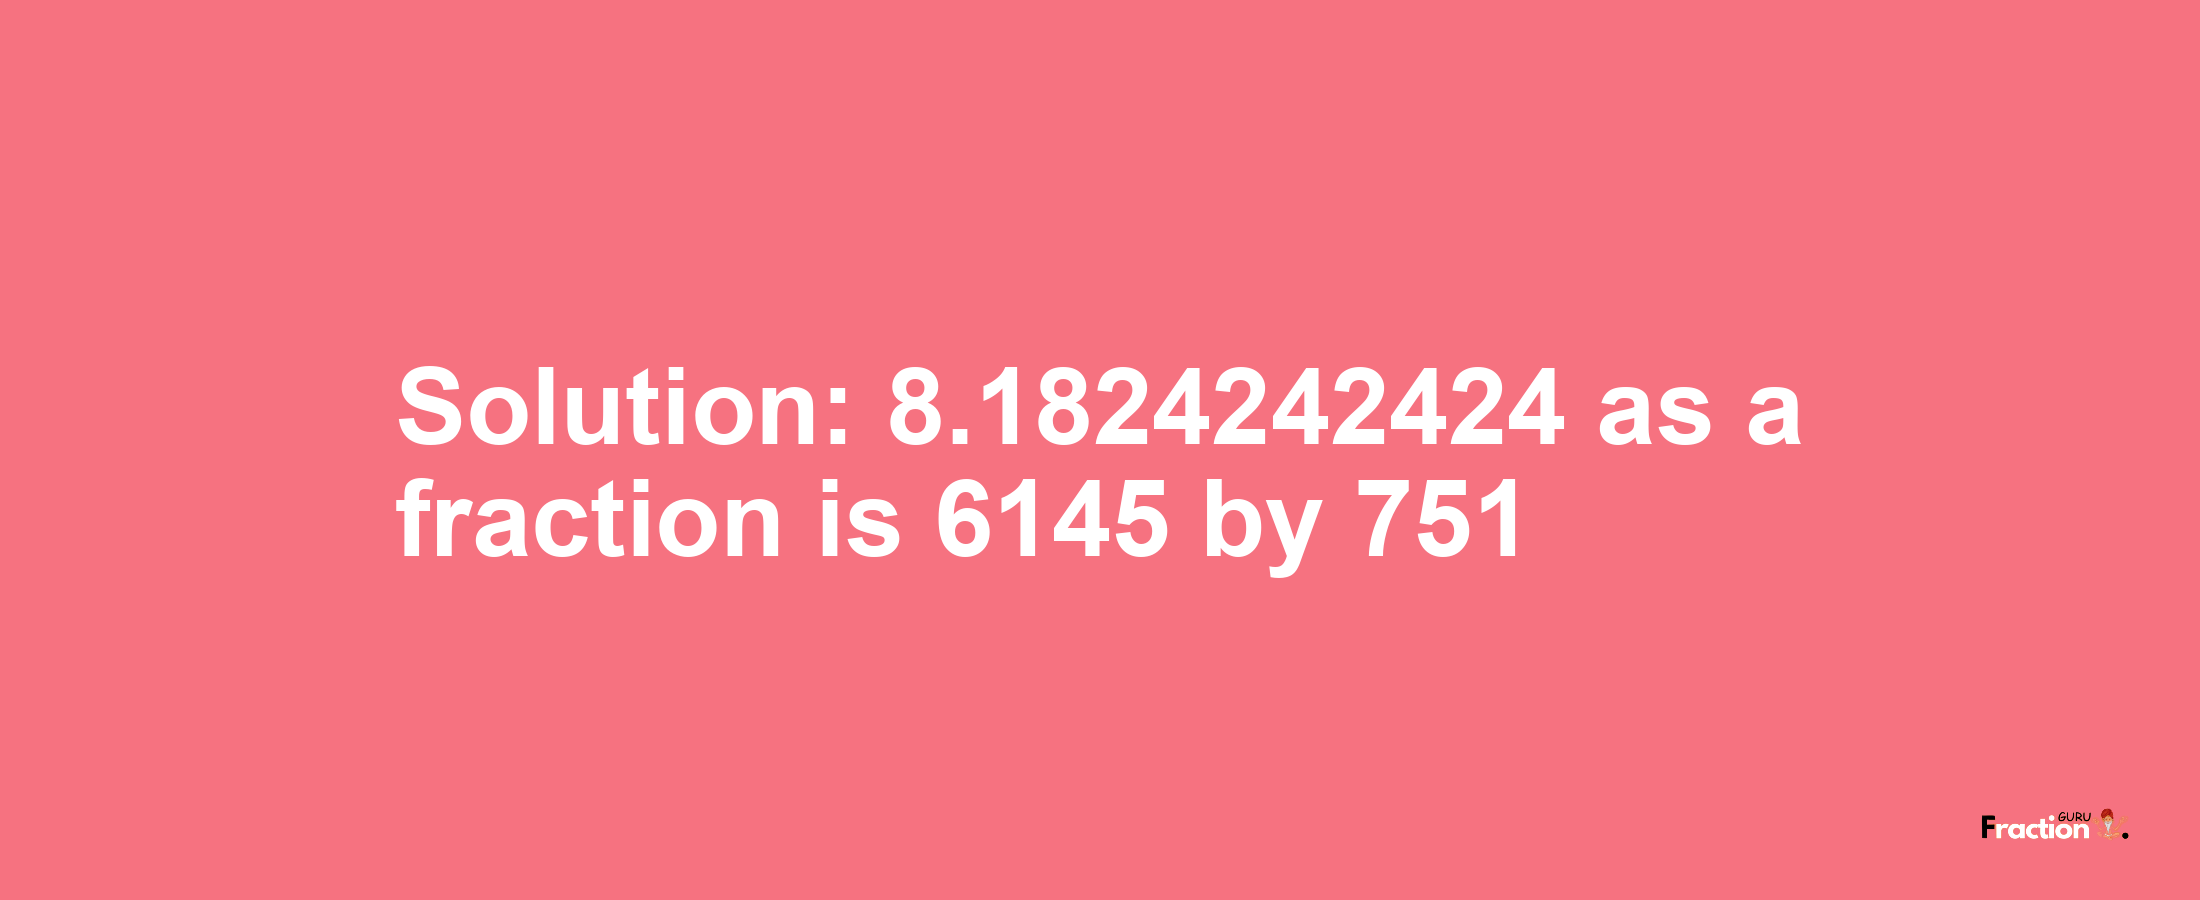 Solution:8.1824242424 as a fraction is 6145/751